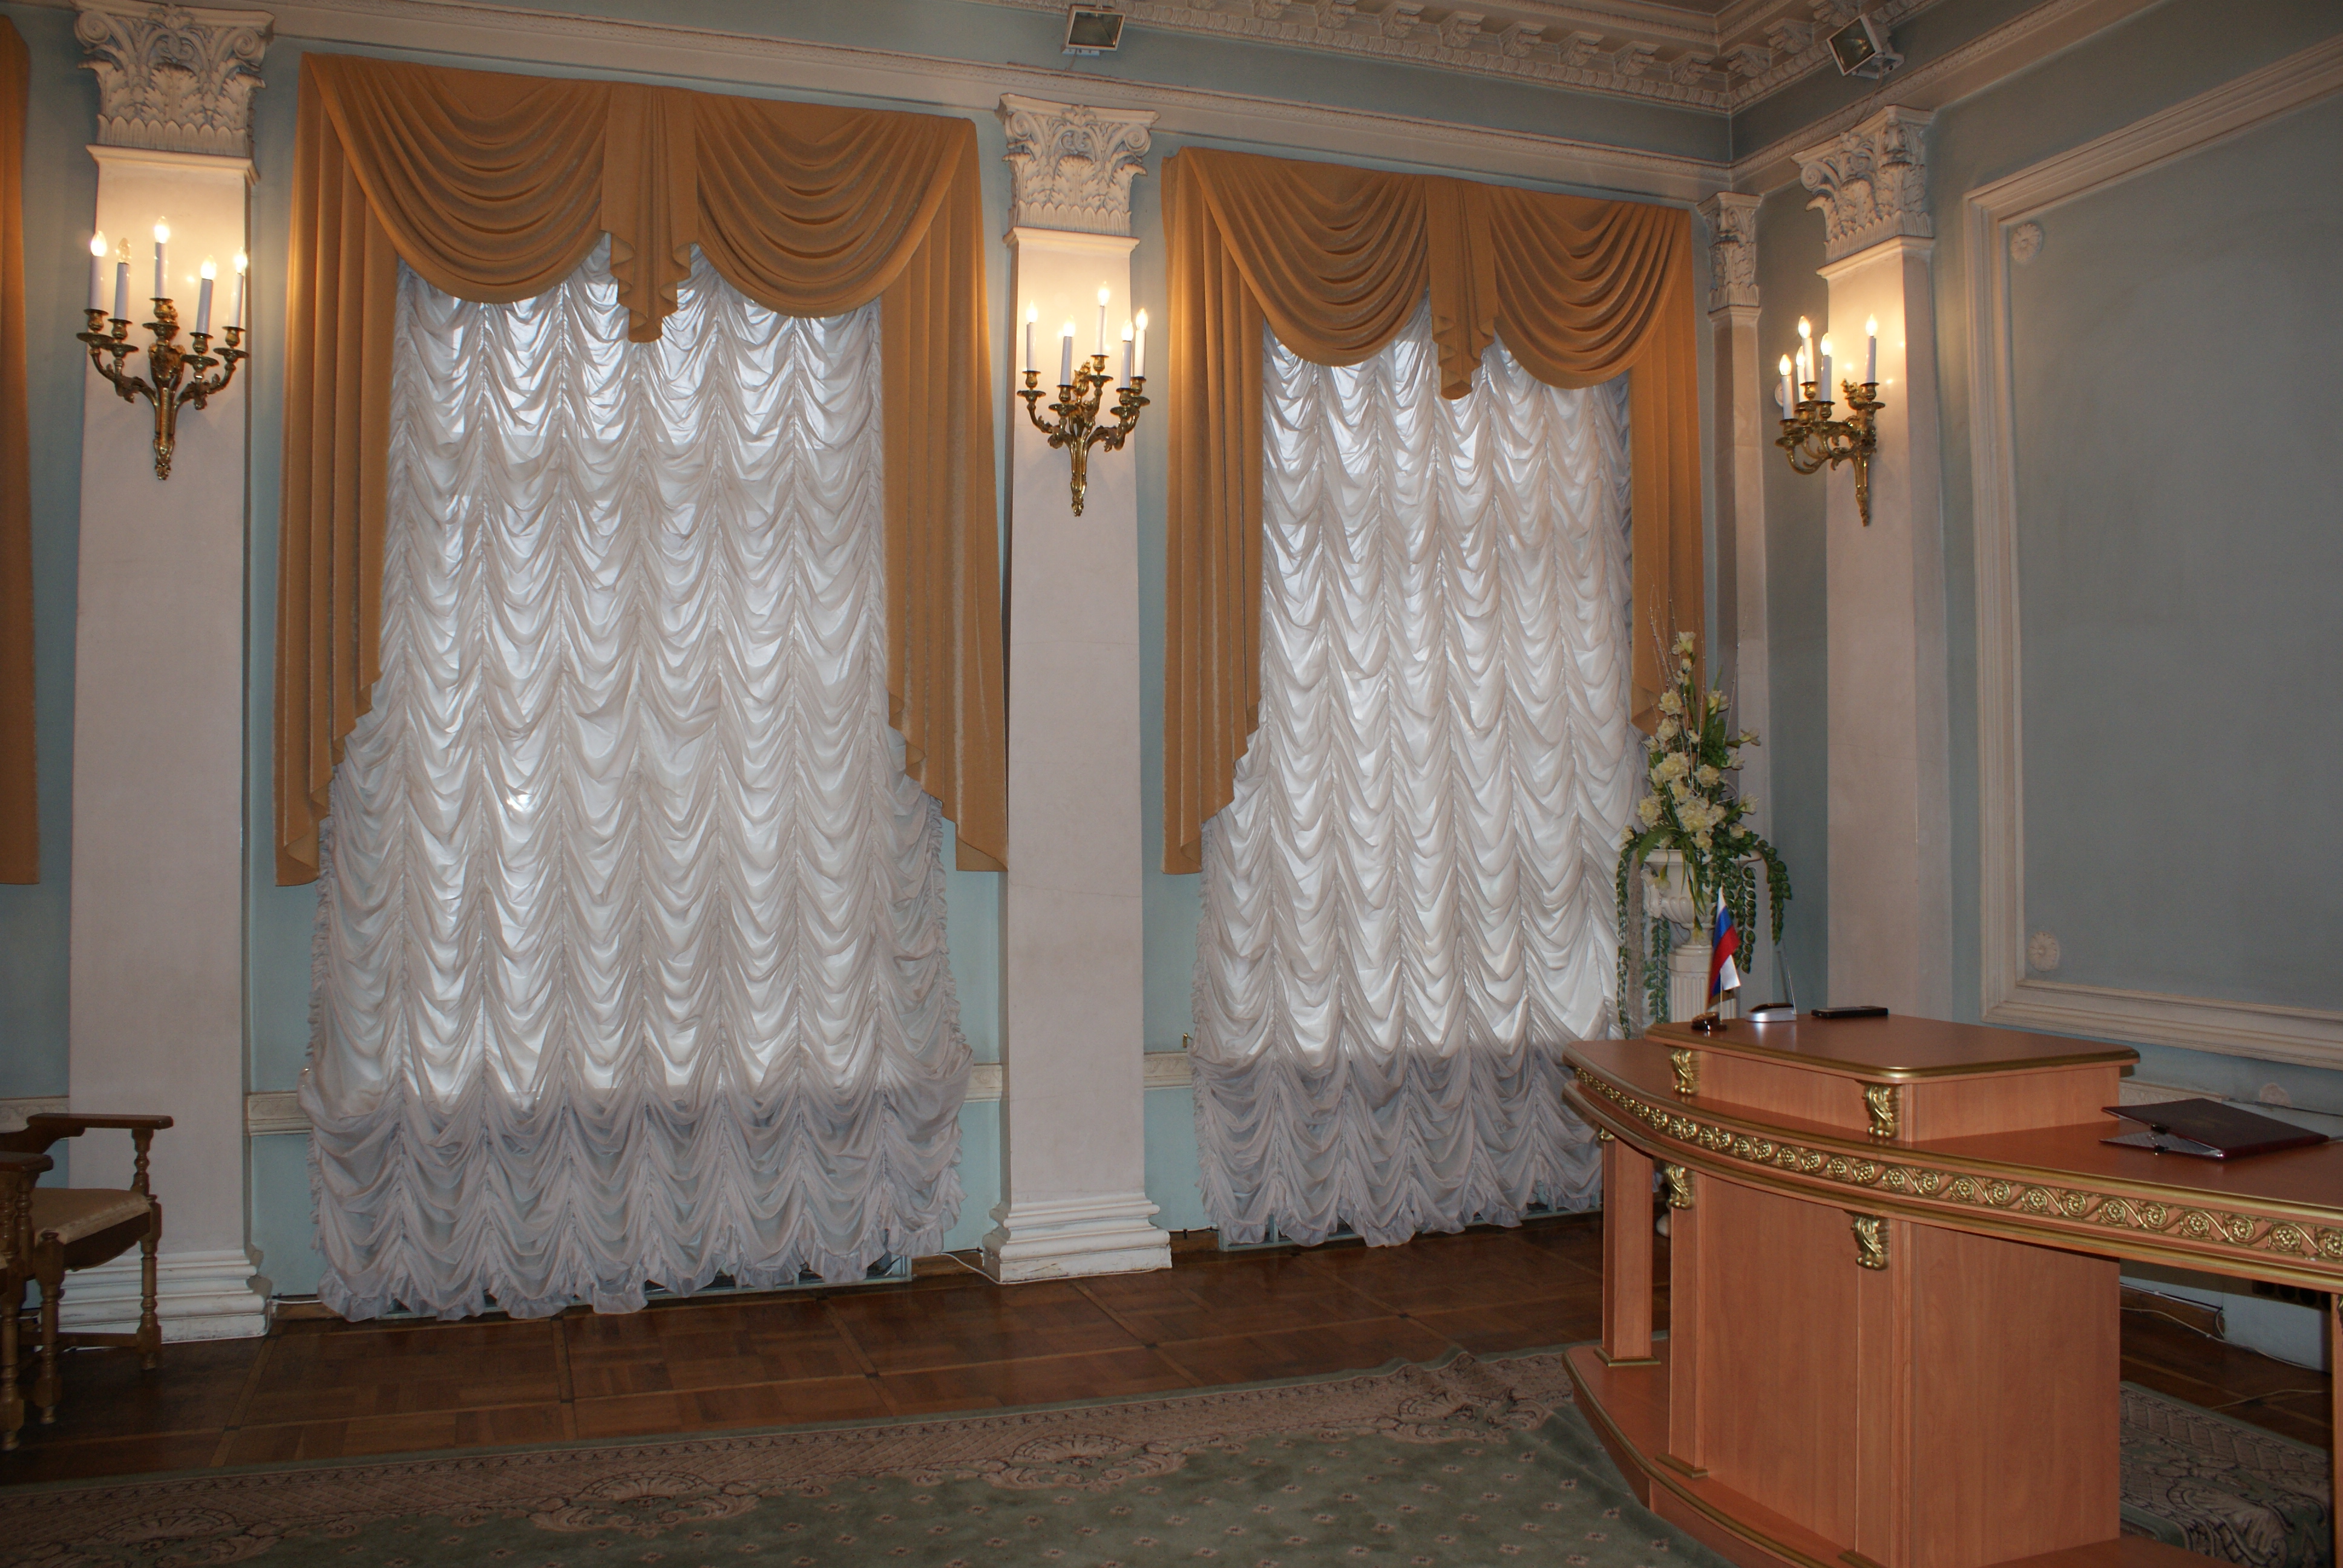 An example of using modern curtains in a bright room interior